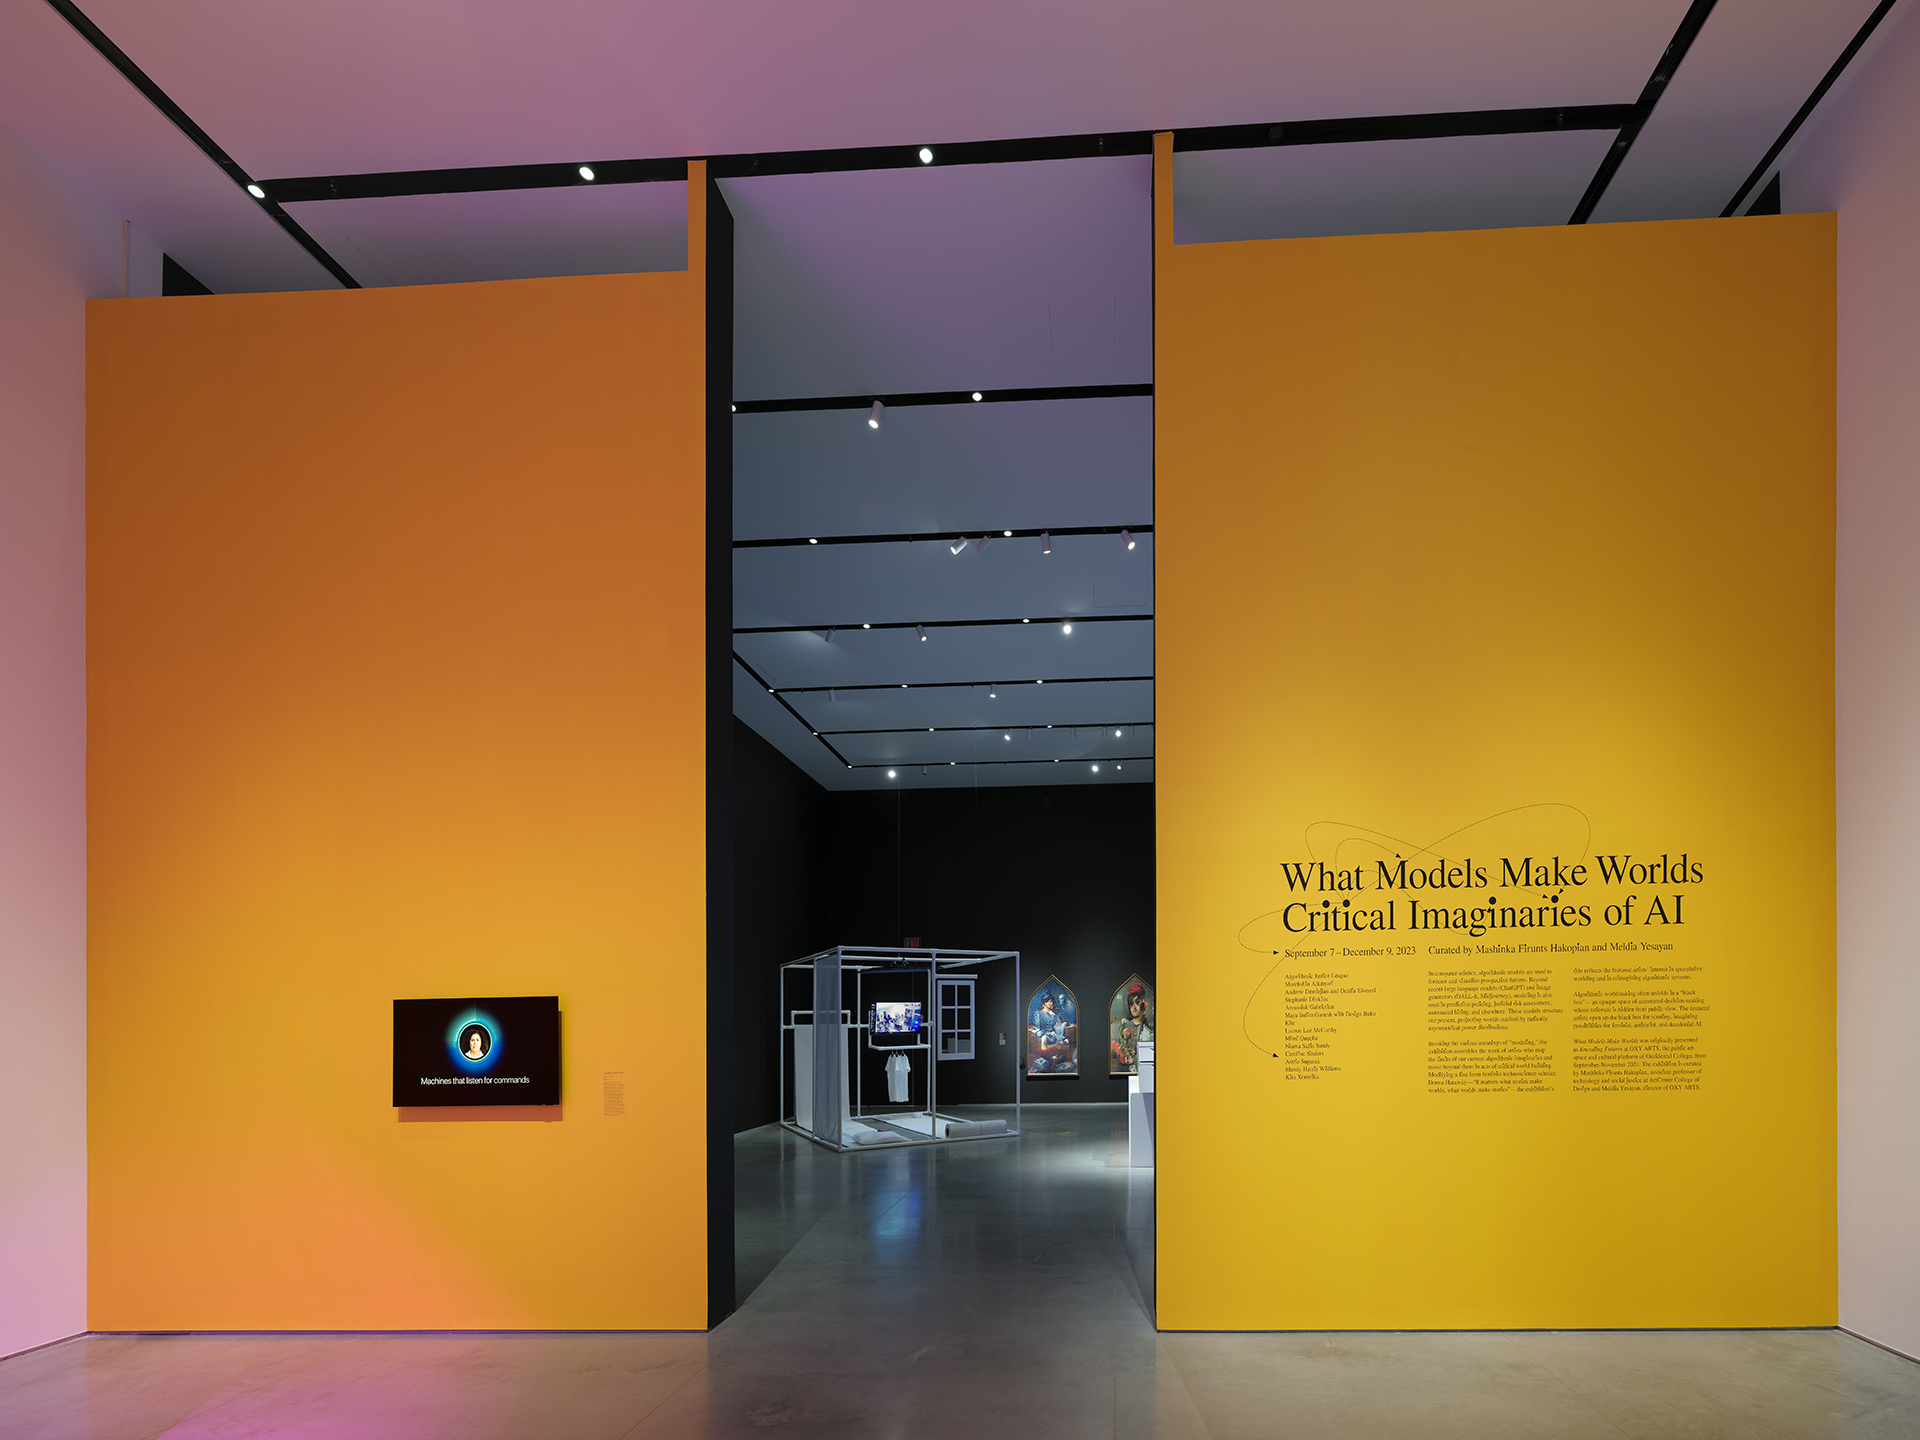 Interior of an art gallery featuring two yellow walls with an aisle in between. The entry text on the right wall reads “What Models Make Worlds, Critical Imaginaries of AI.” Further down the aisle between the walls, some artworks can be seen deeper inside the gallery.